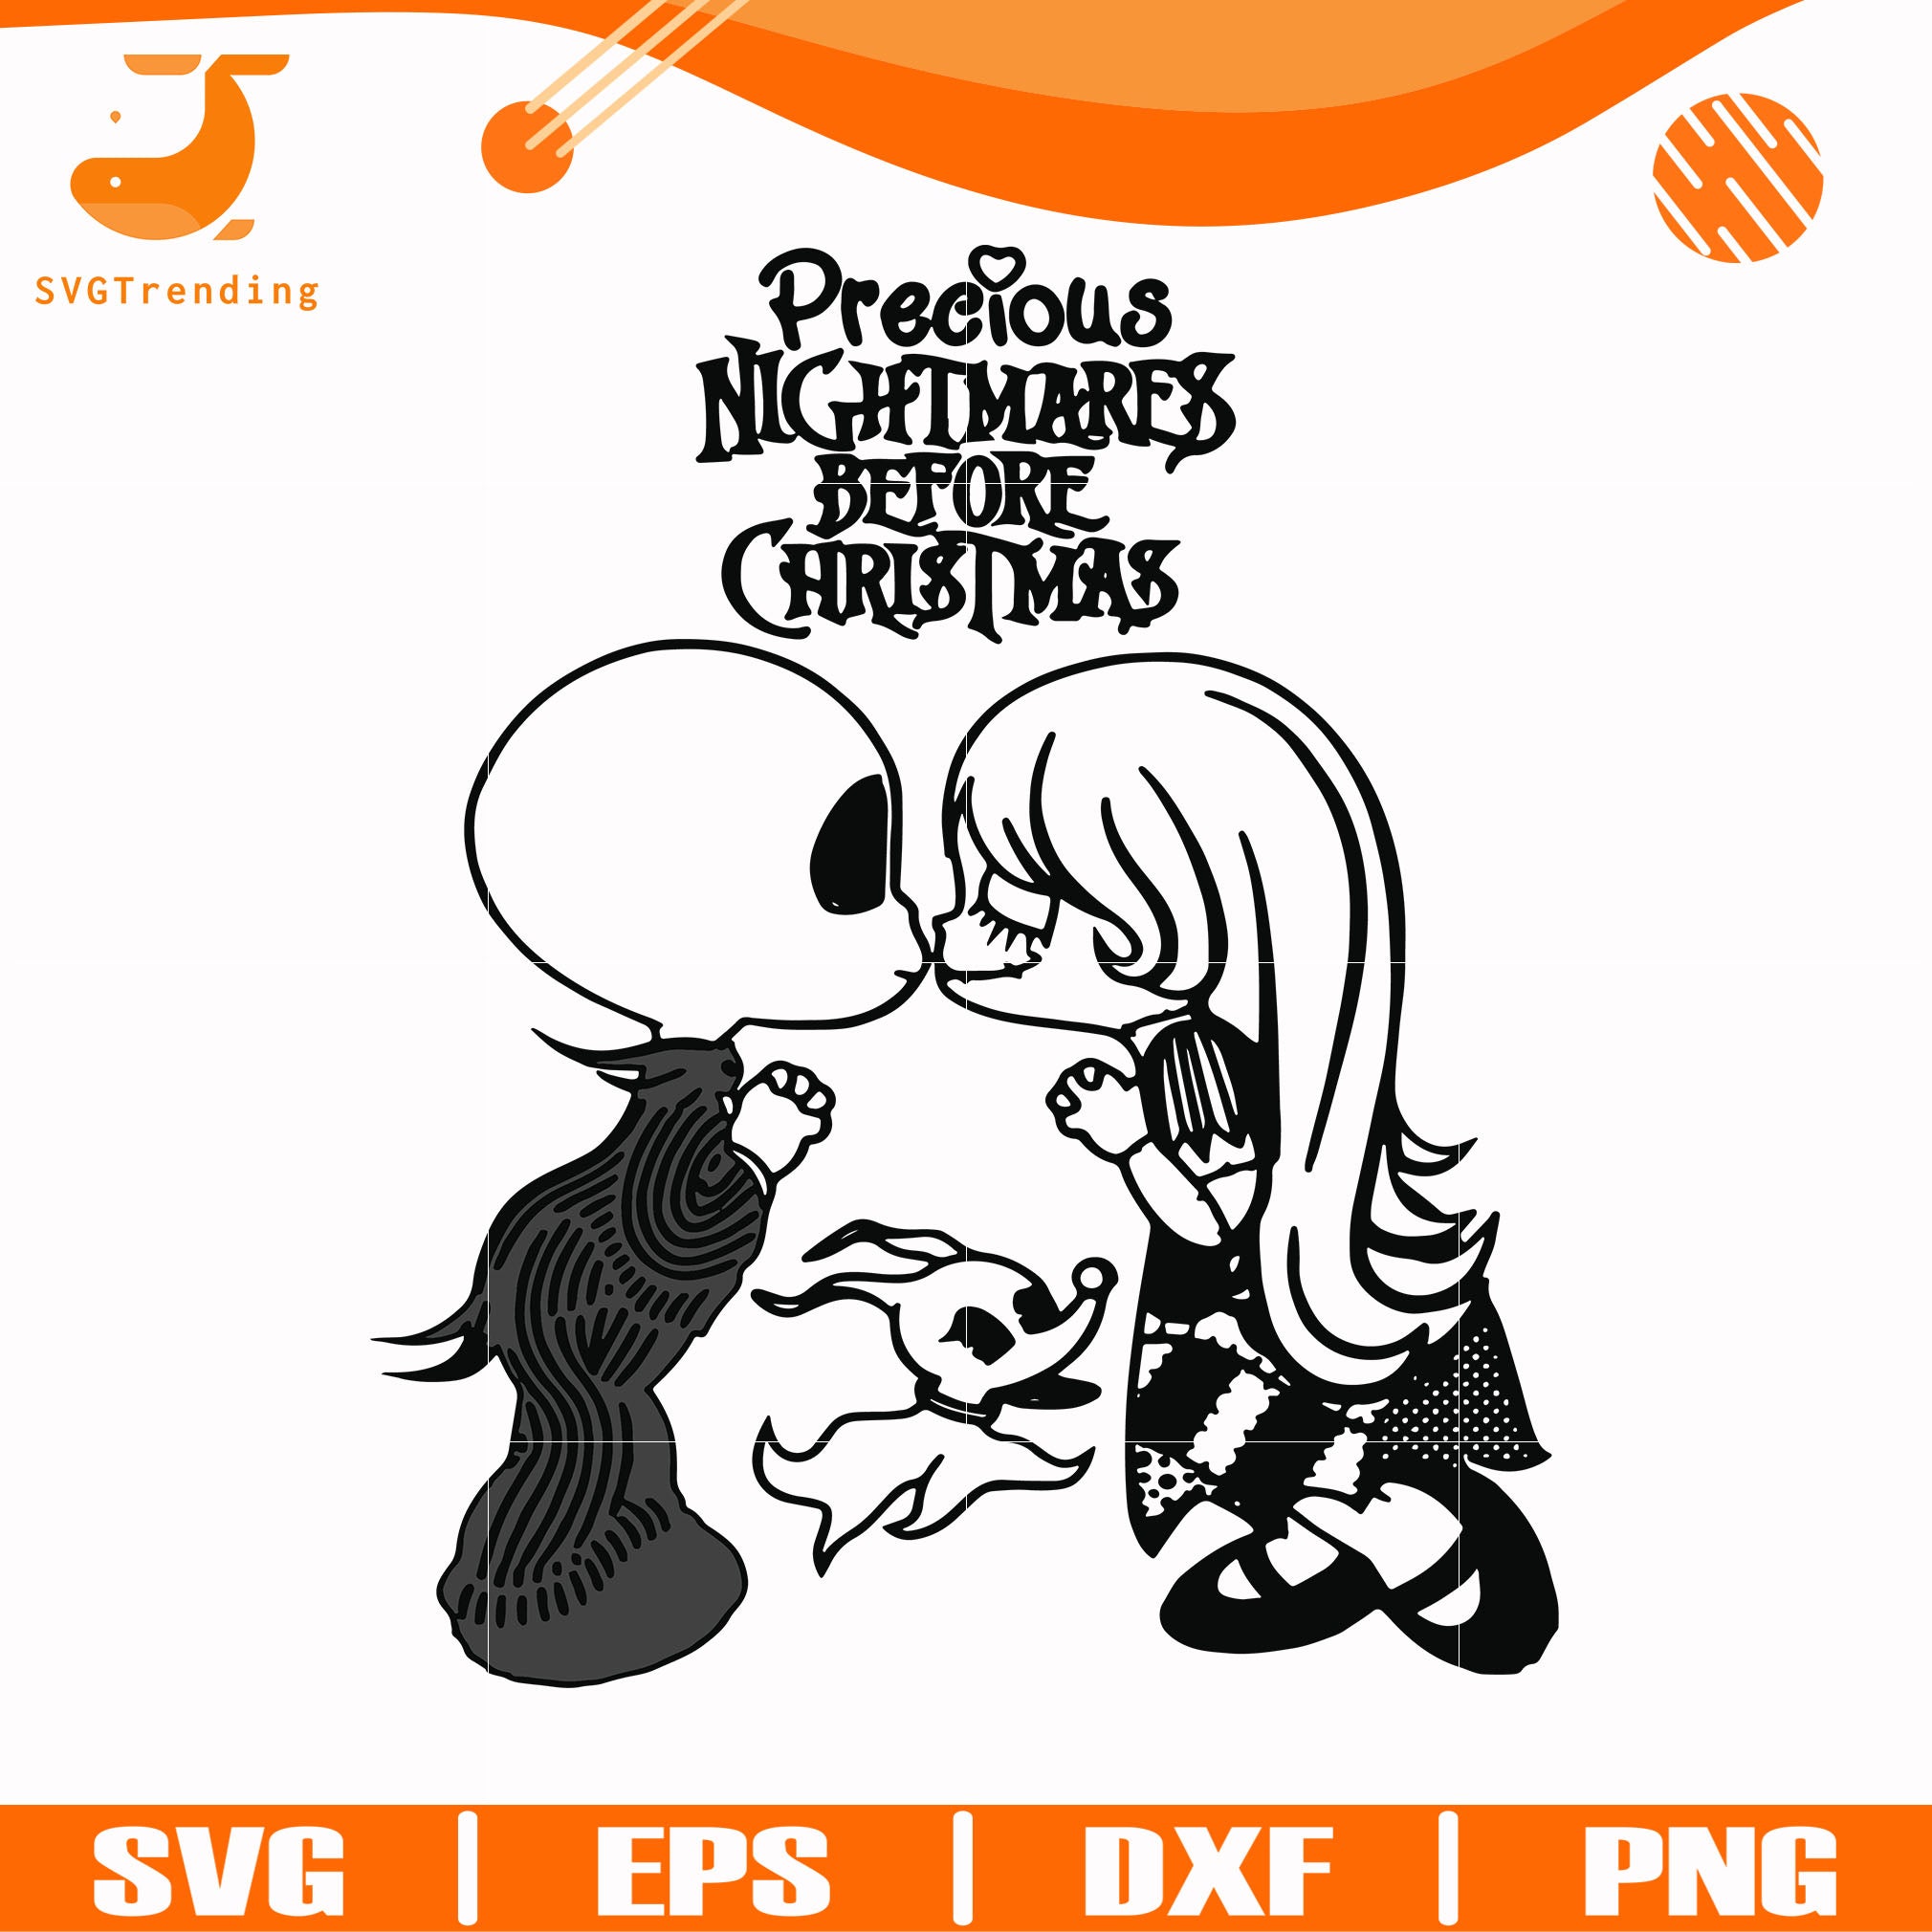 Precious nightmare before Christmas svg, png, dxf, eps ...